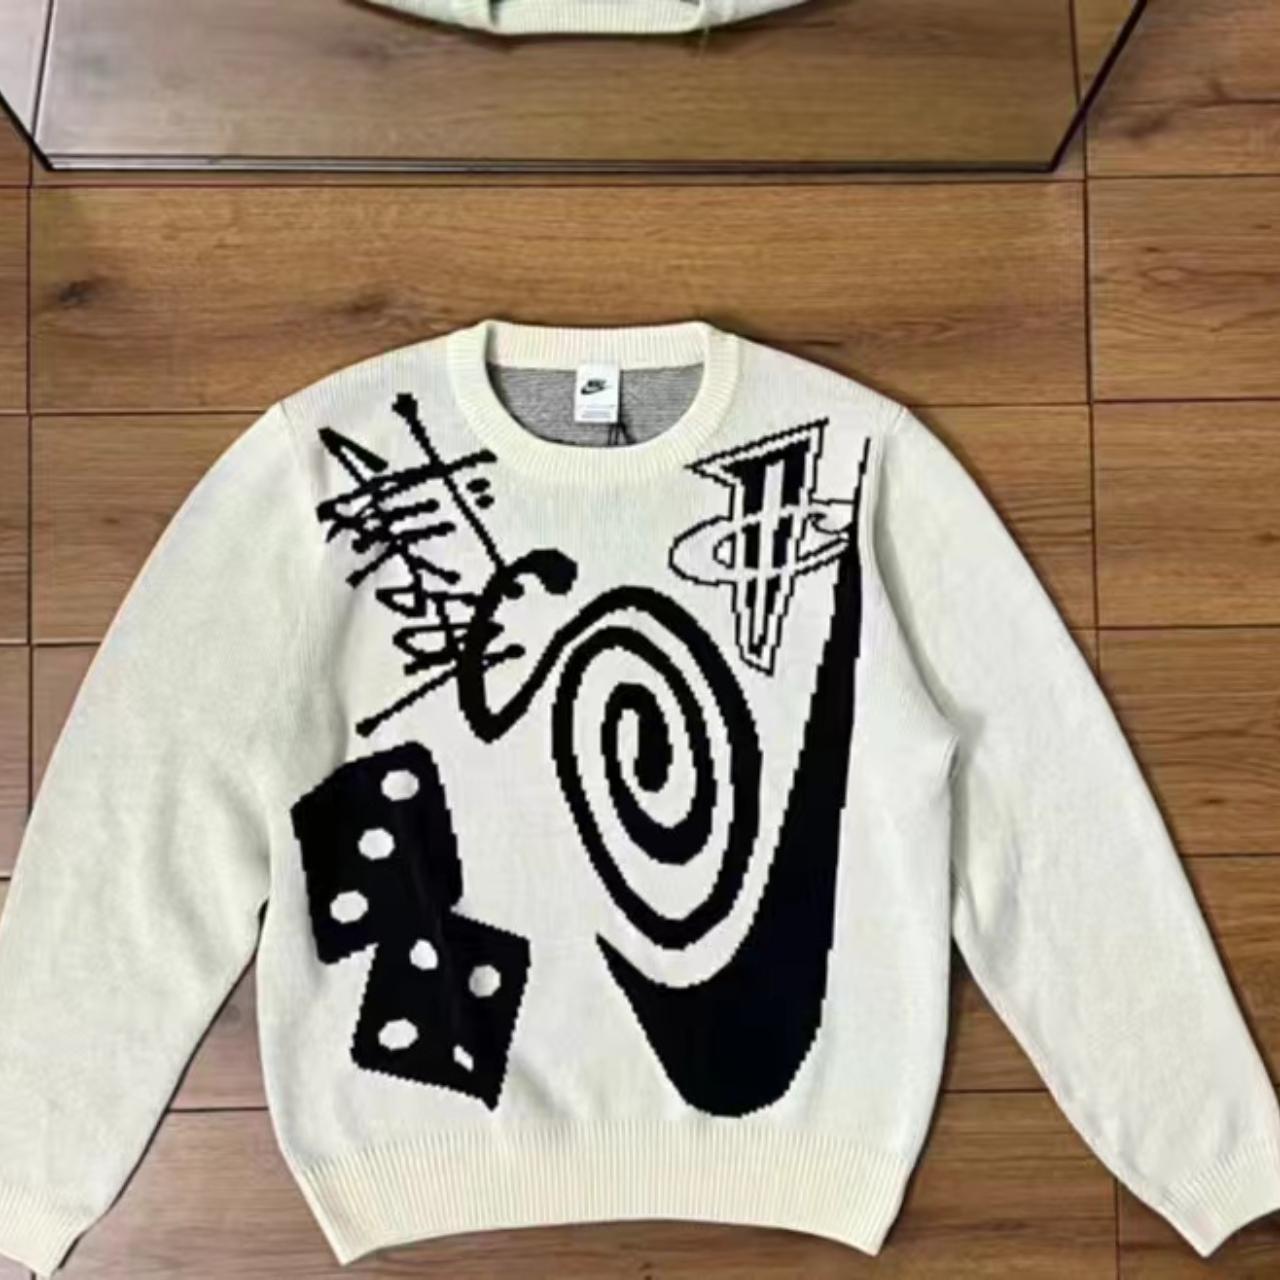 Stussy knitted sweater - Depop